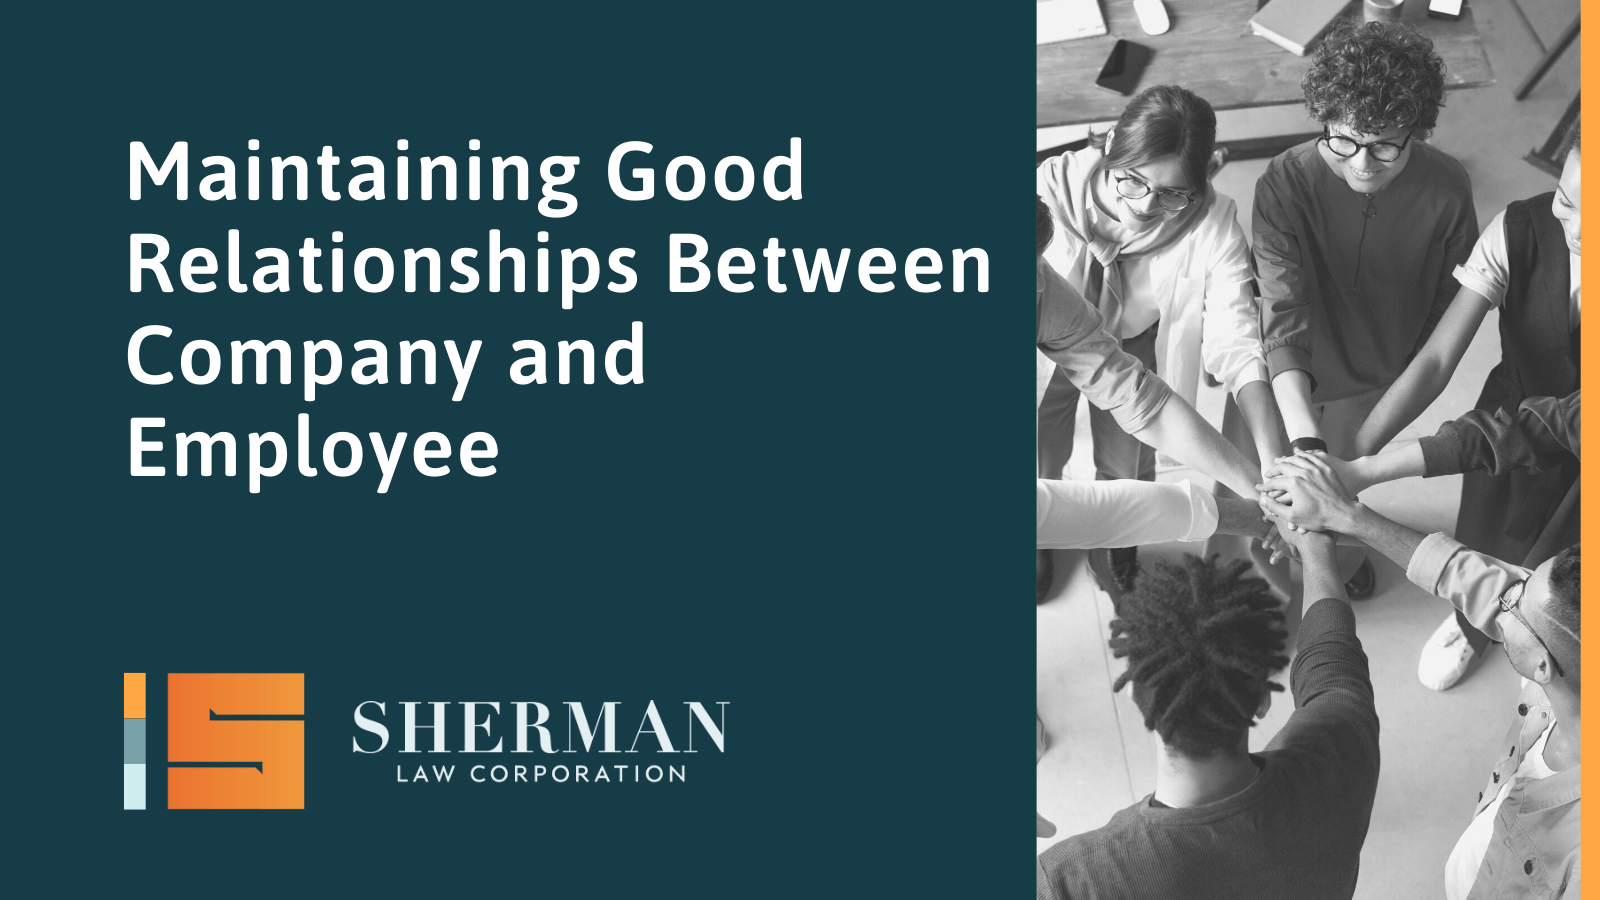 Maintaining Good Relationships Between Company and Employee- A Brief Case Study - sherman law corporation